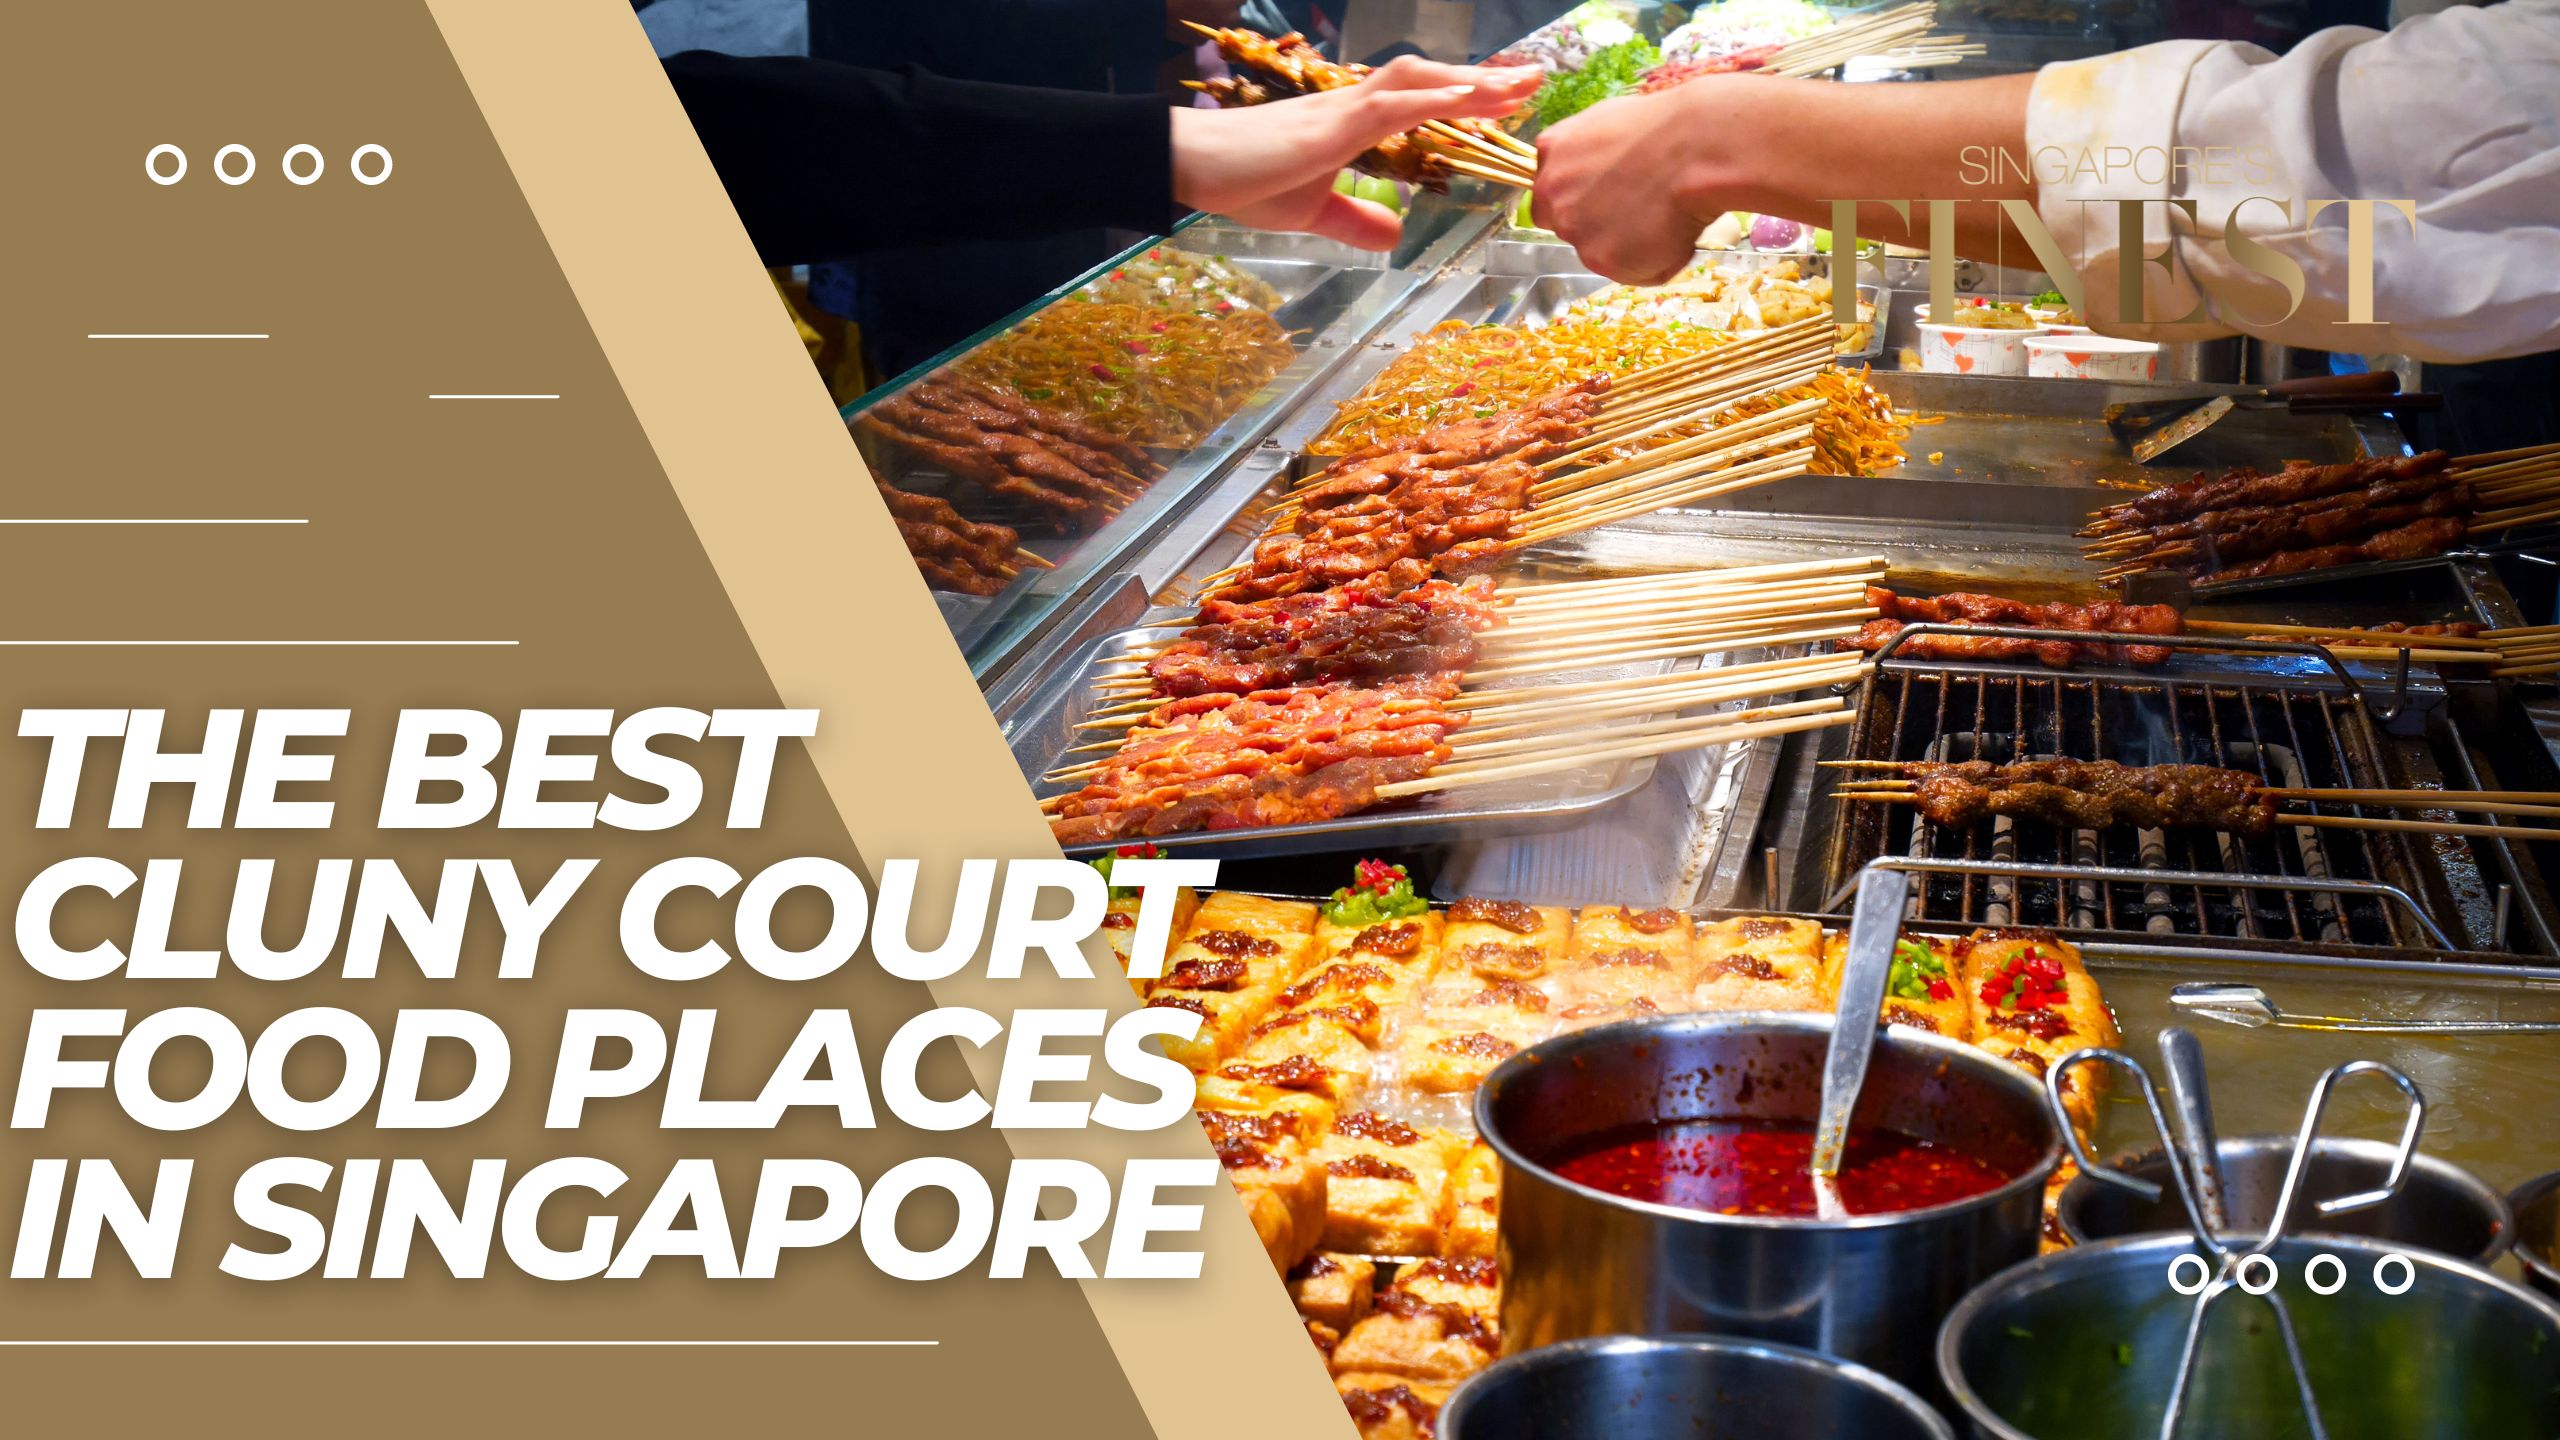 The Finest Cluny Court Food Places in Singapore